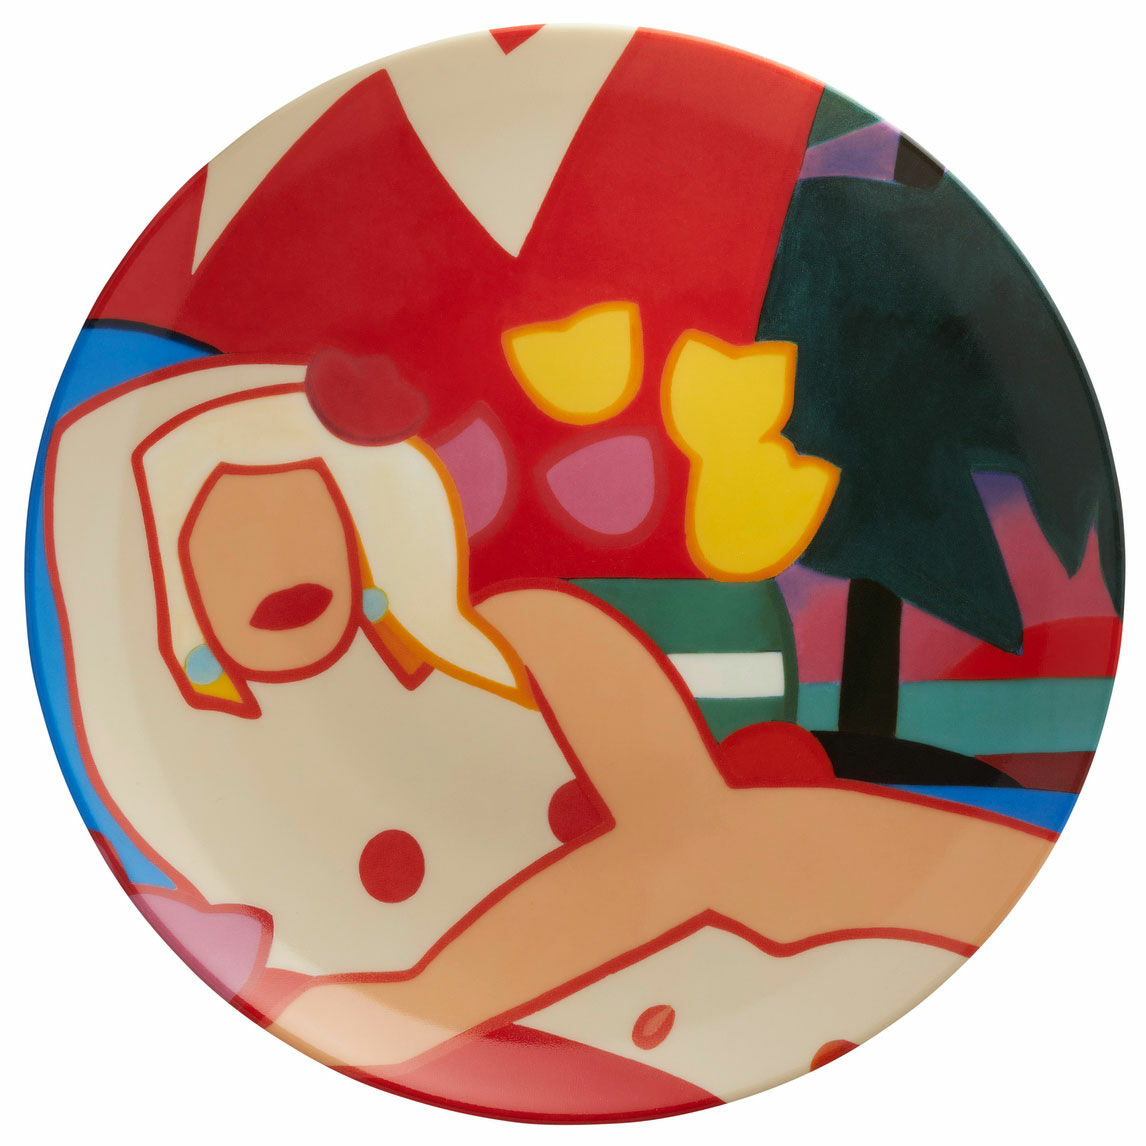 Porcelain plate "Sunset Nude with Palm Trees" (2003) by Tom Wesselmann